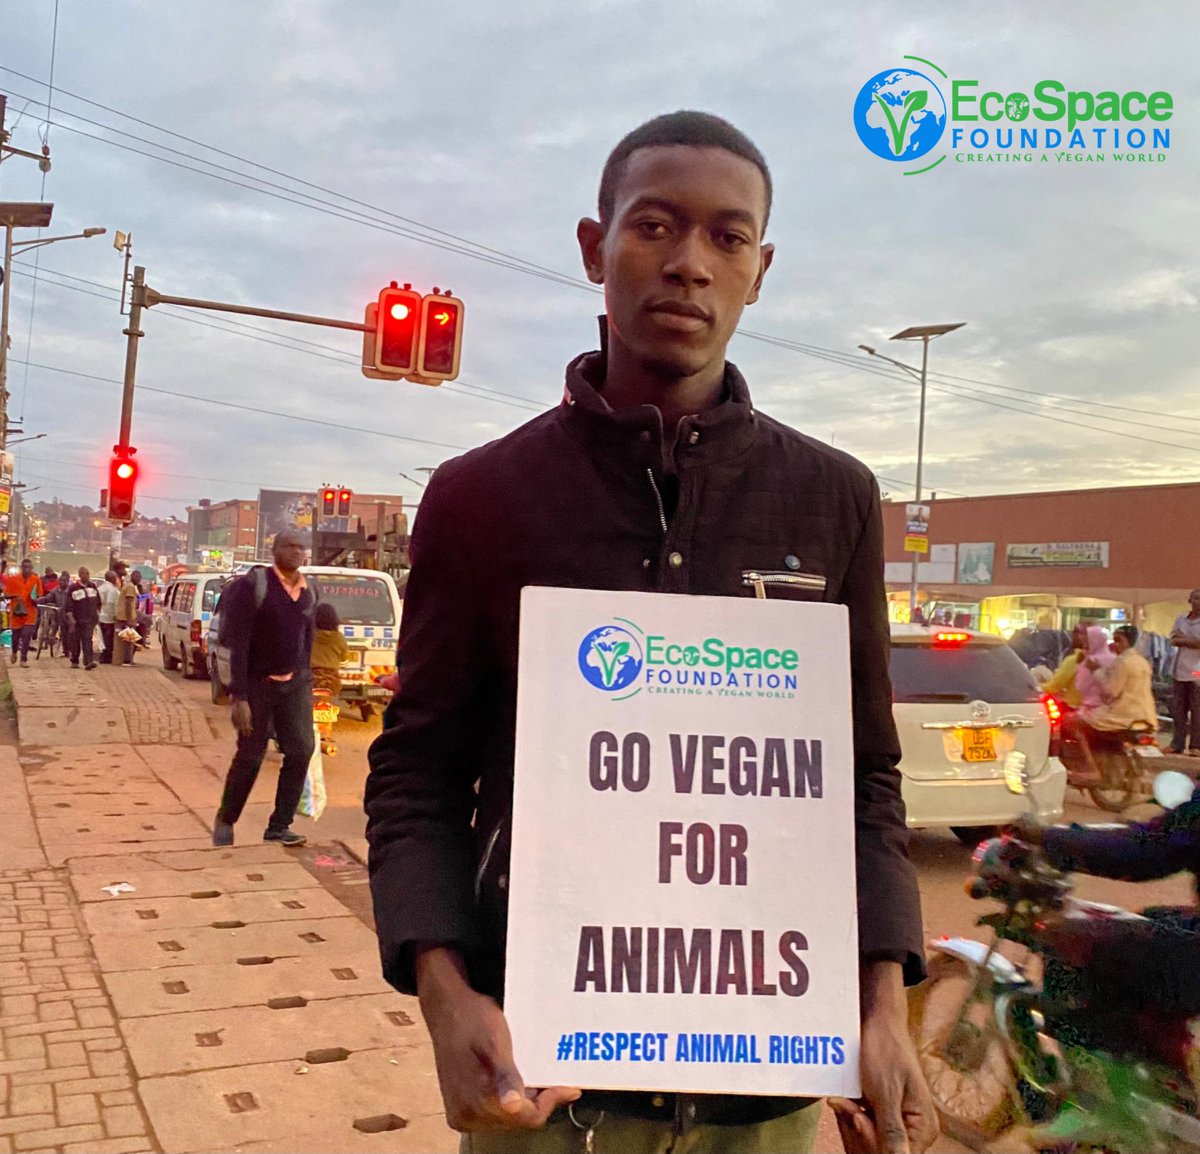 Go vegan for the innocent animals, get involved, join the movement and make a difference, together, let’s end animal injustice #VeganForAnimals #GoVegan #GetInvolved #AnimalRightsMatter #EndCruelty